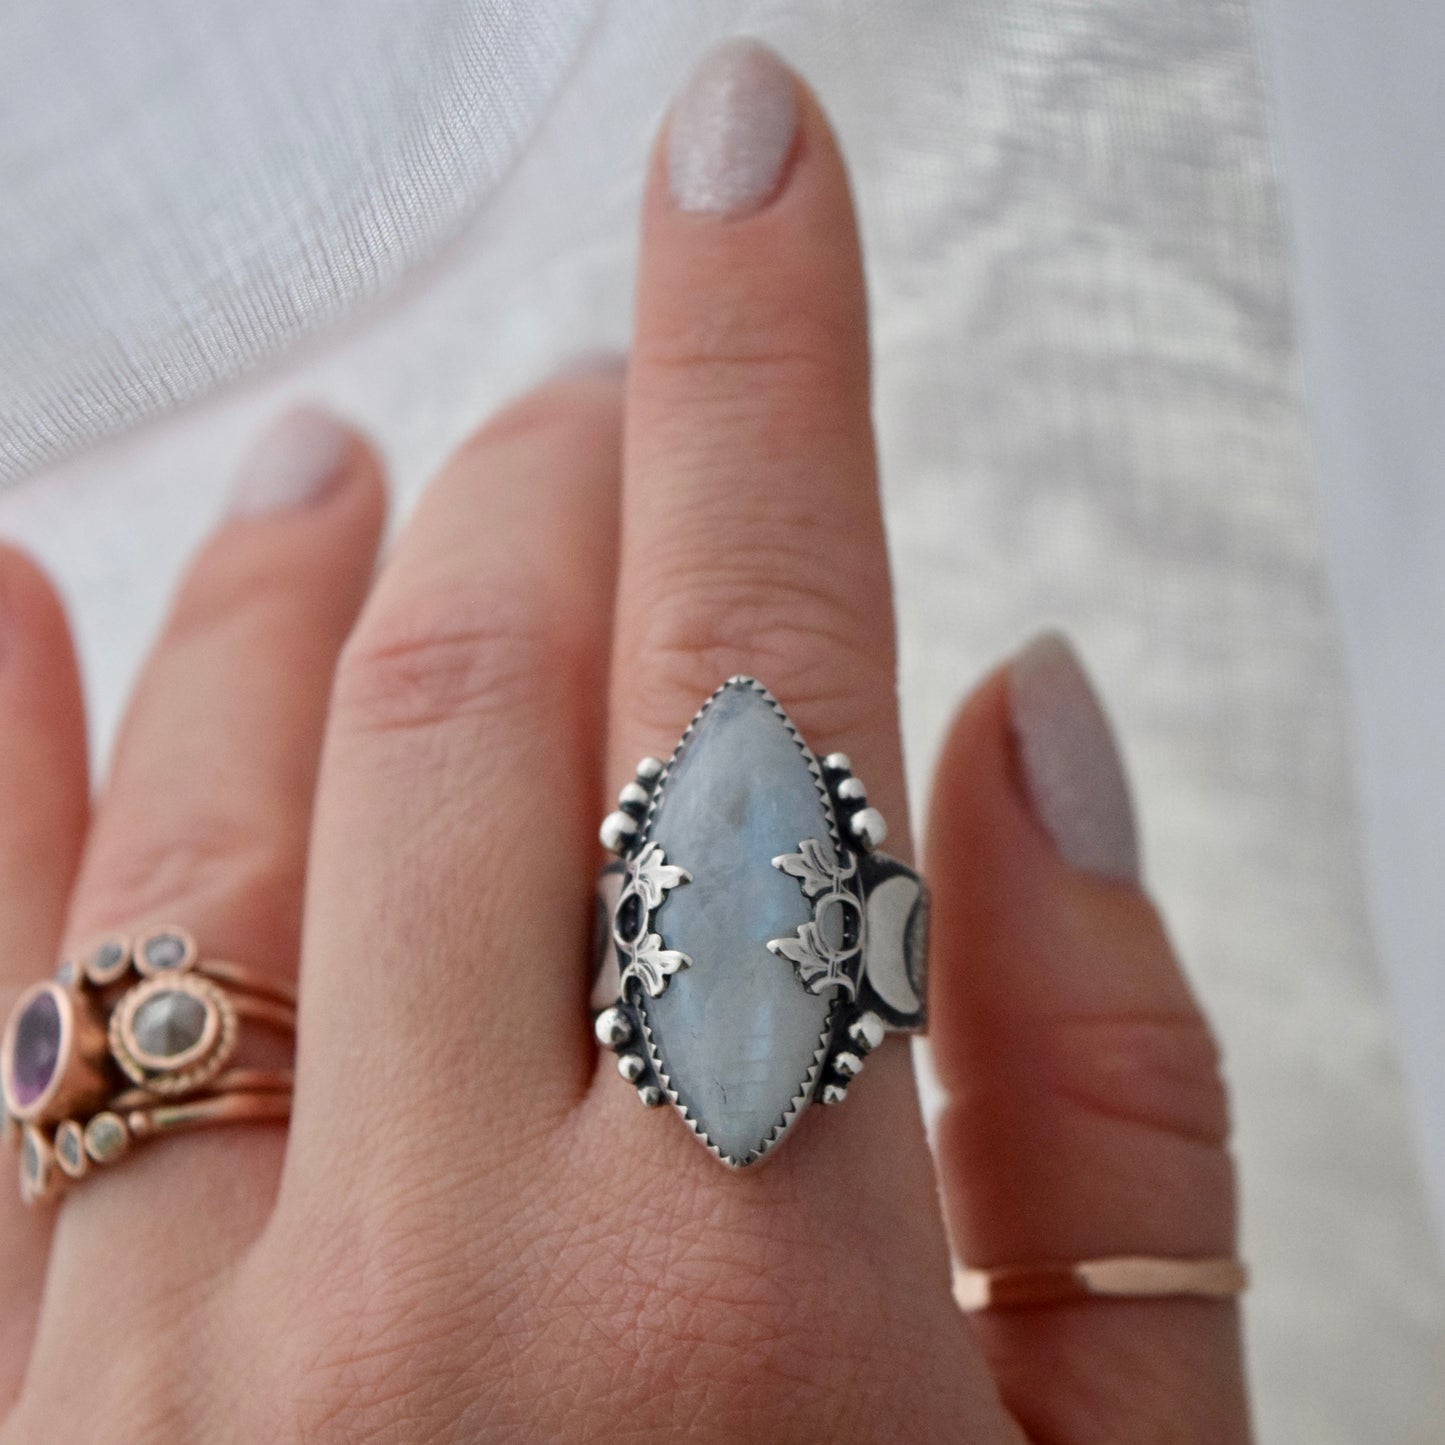 Lunar Phase Statement Ring with Rainbow Moonstone size 7.25/7.5